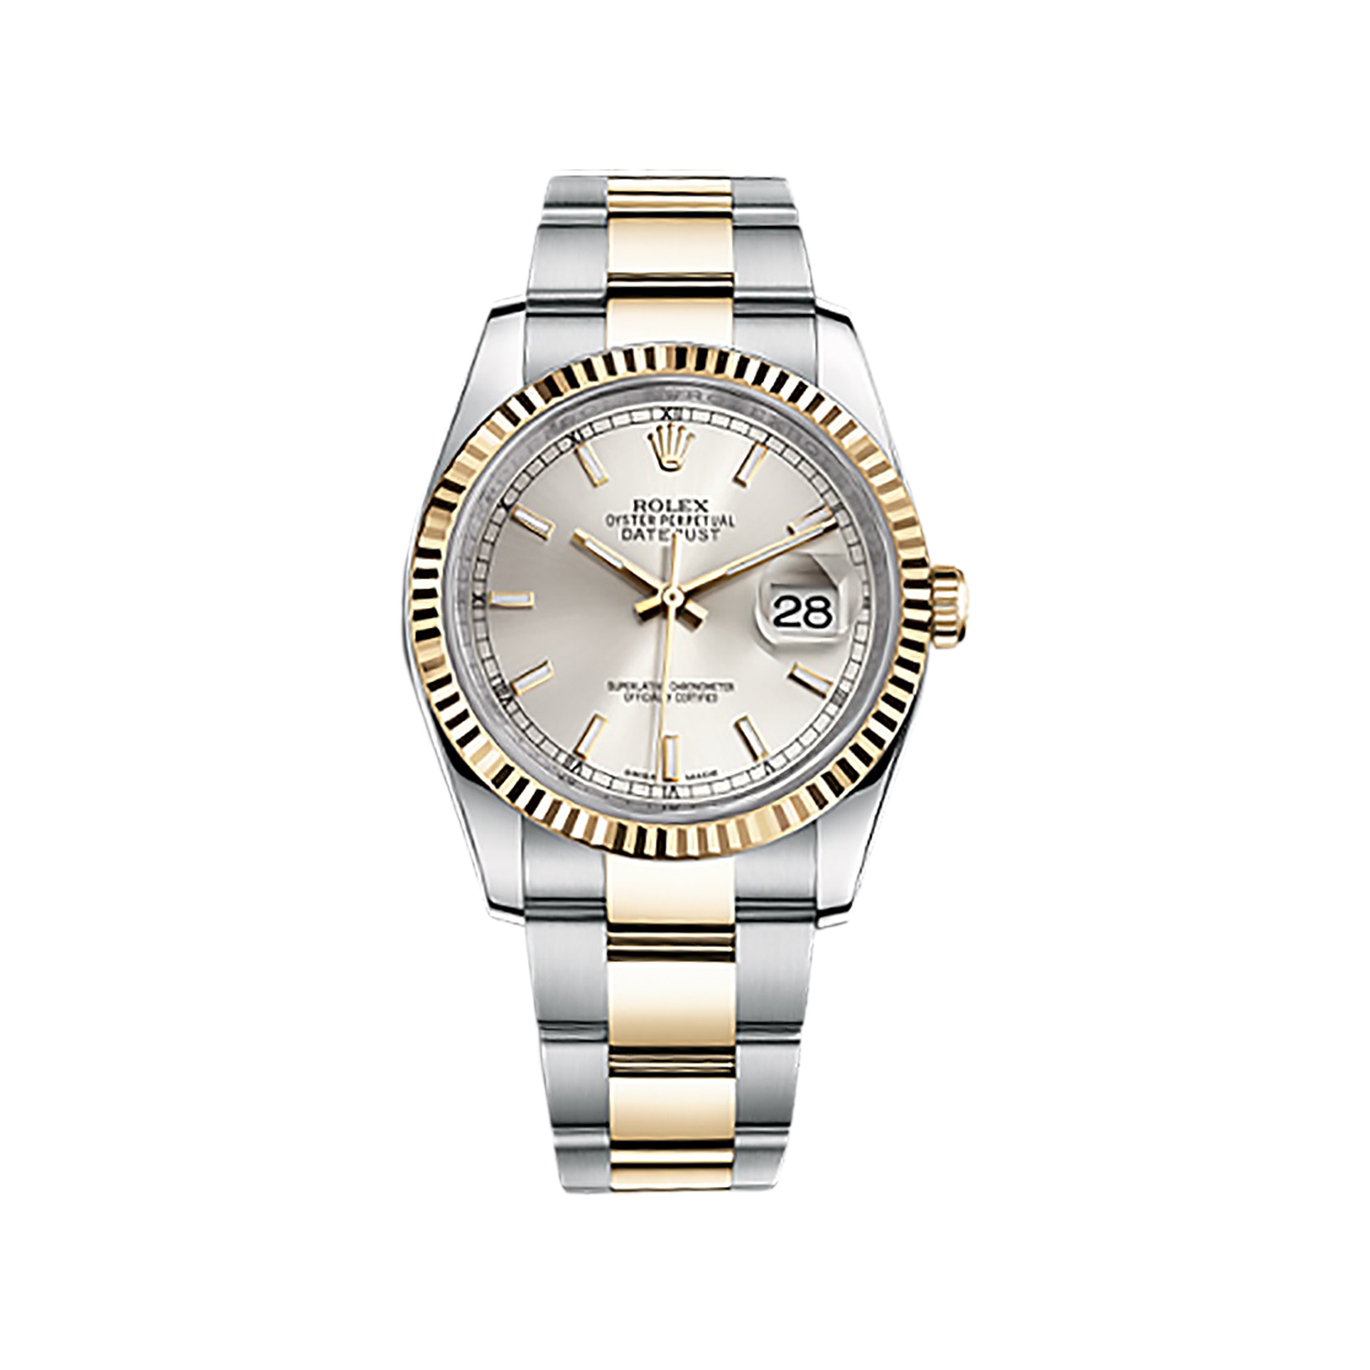 Datejust 36 116233 Gold & Stainless Steel Watch (Silver)